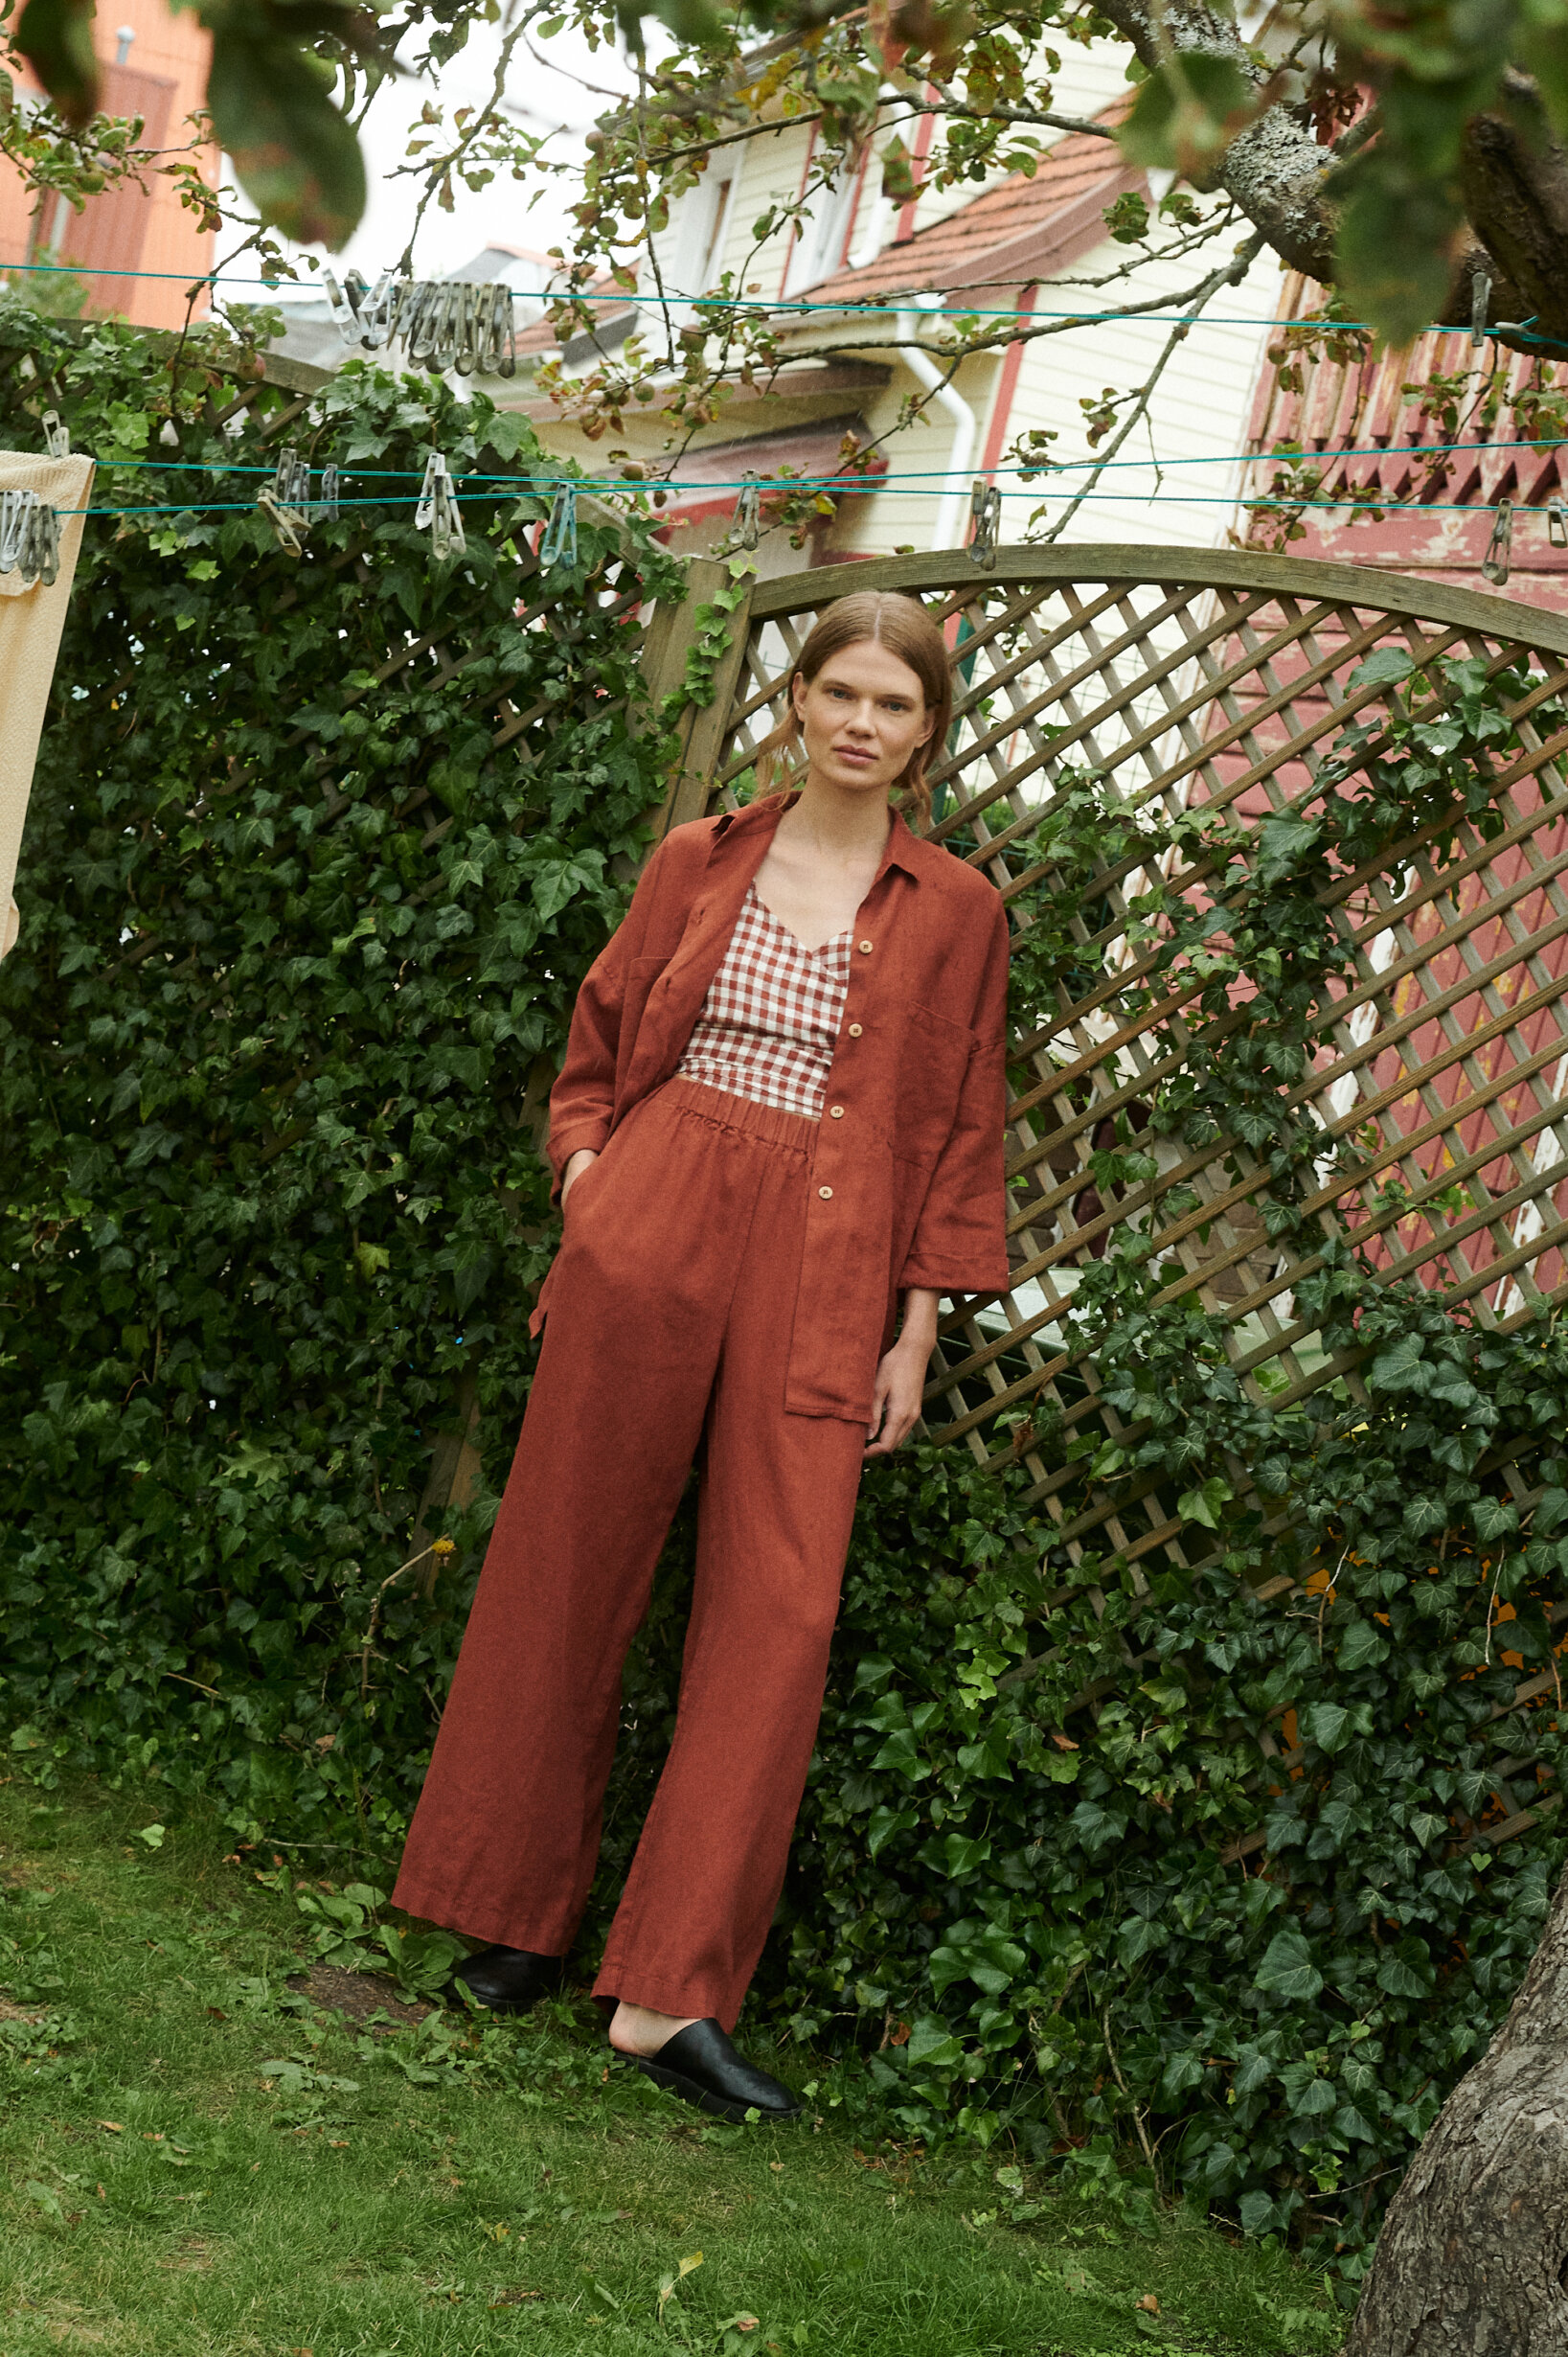 model in a garden wearing a terrracotta gingham linen wrap top and wide leg trousers and shirt in terracotta linen